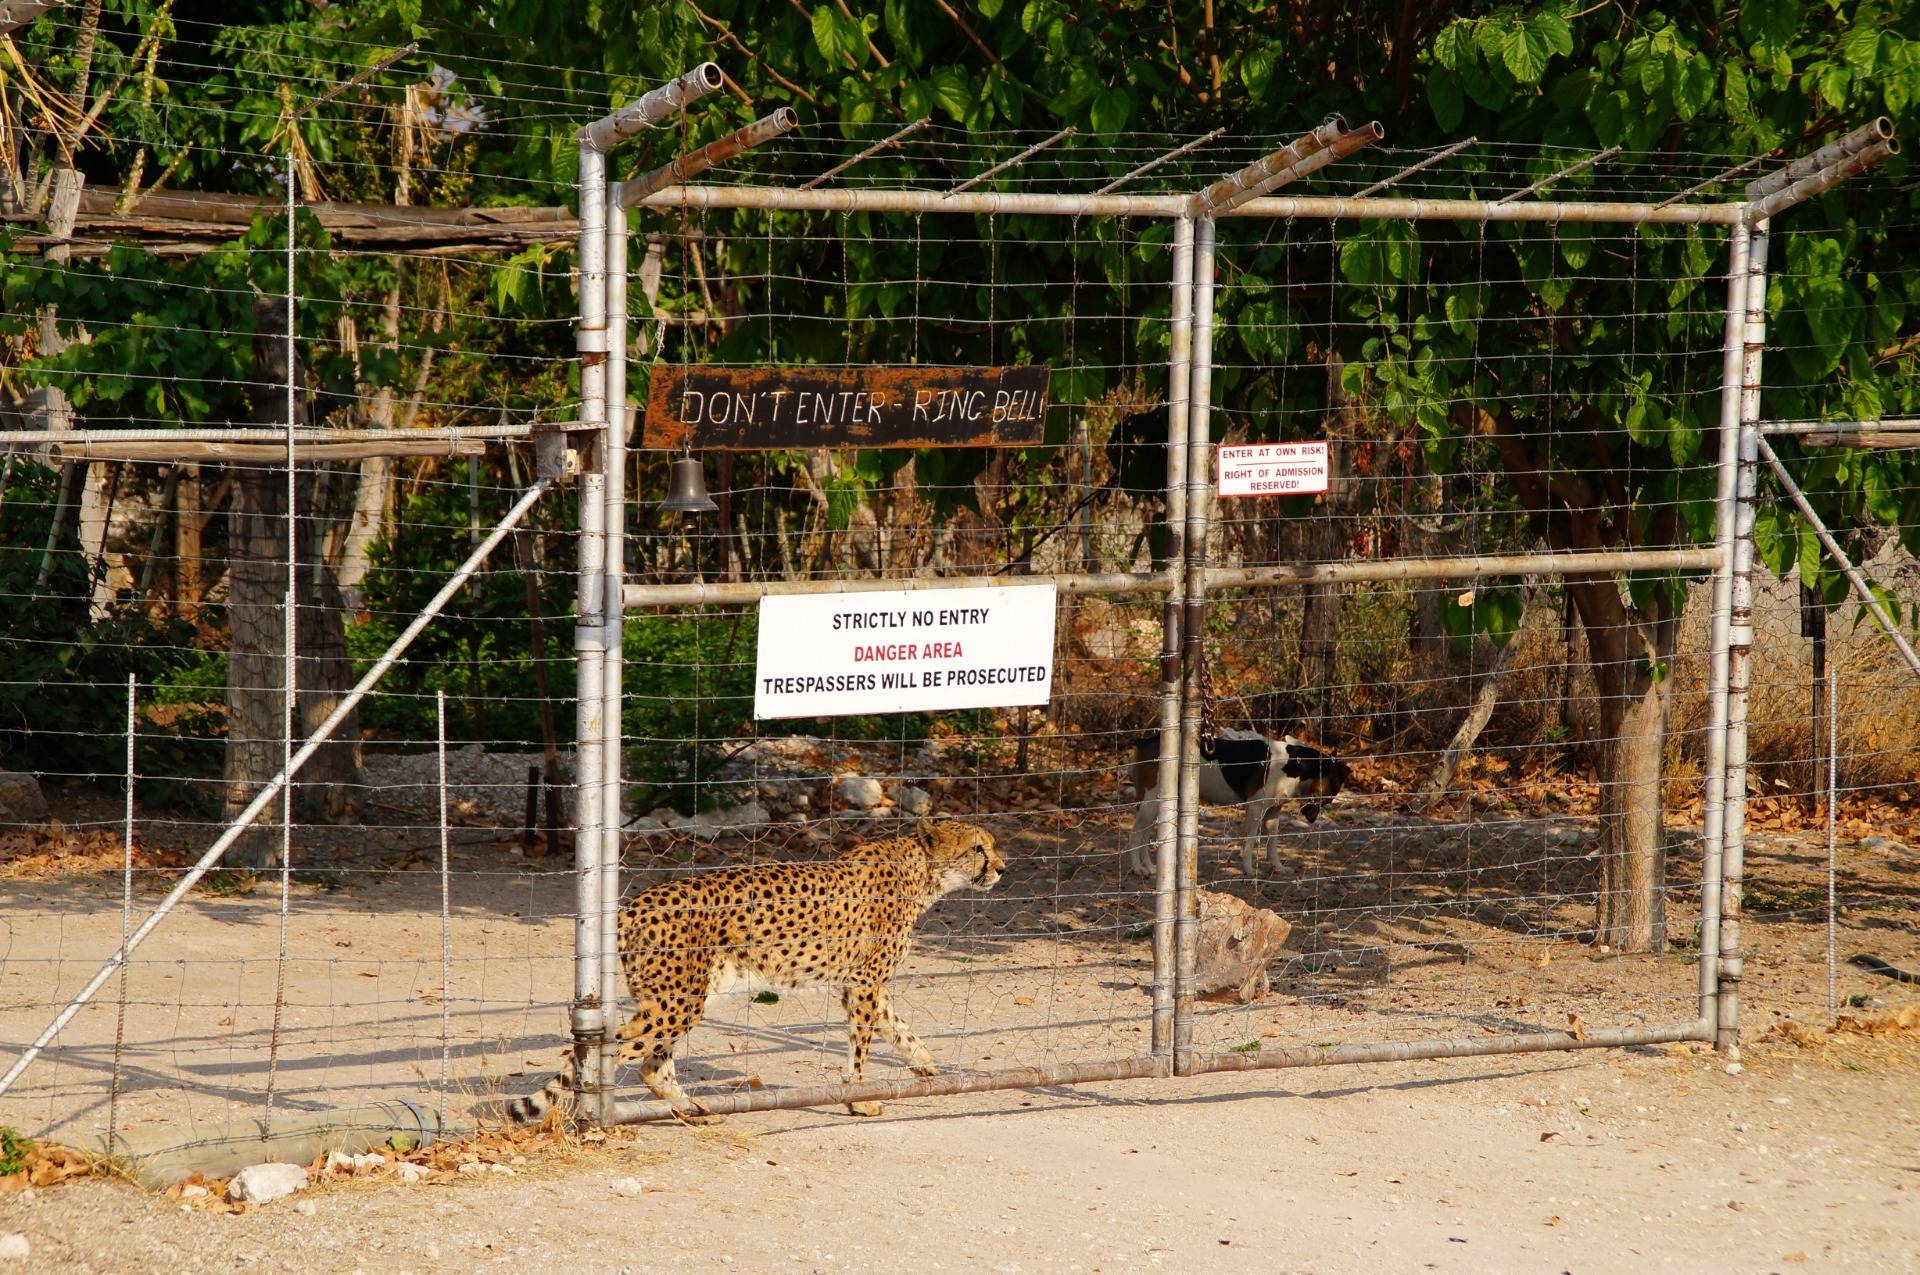 Why that many ”do not enter” signs? Who would dare to enter with cheetah guarding?